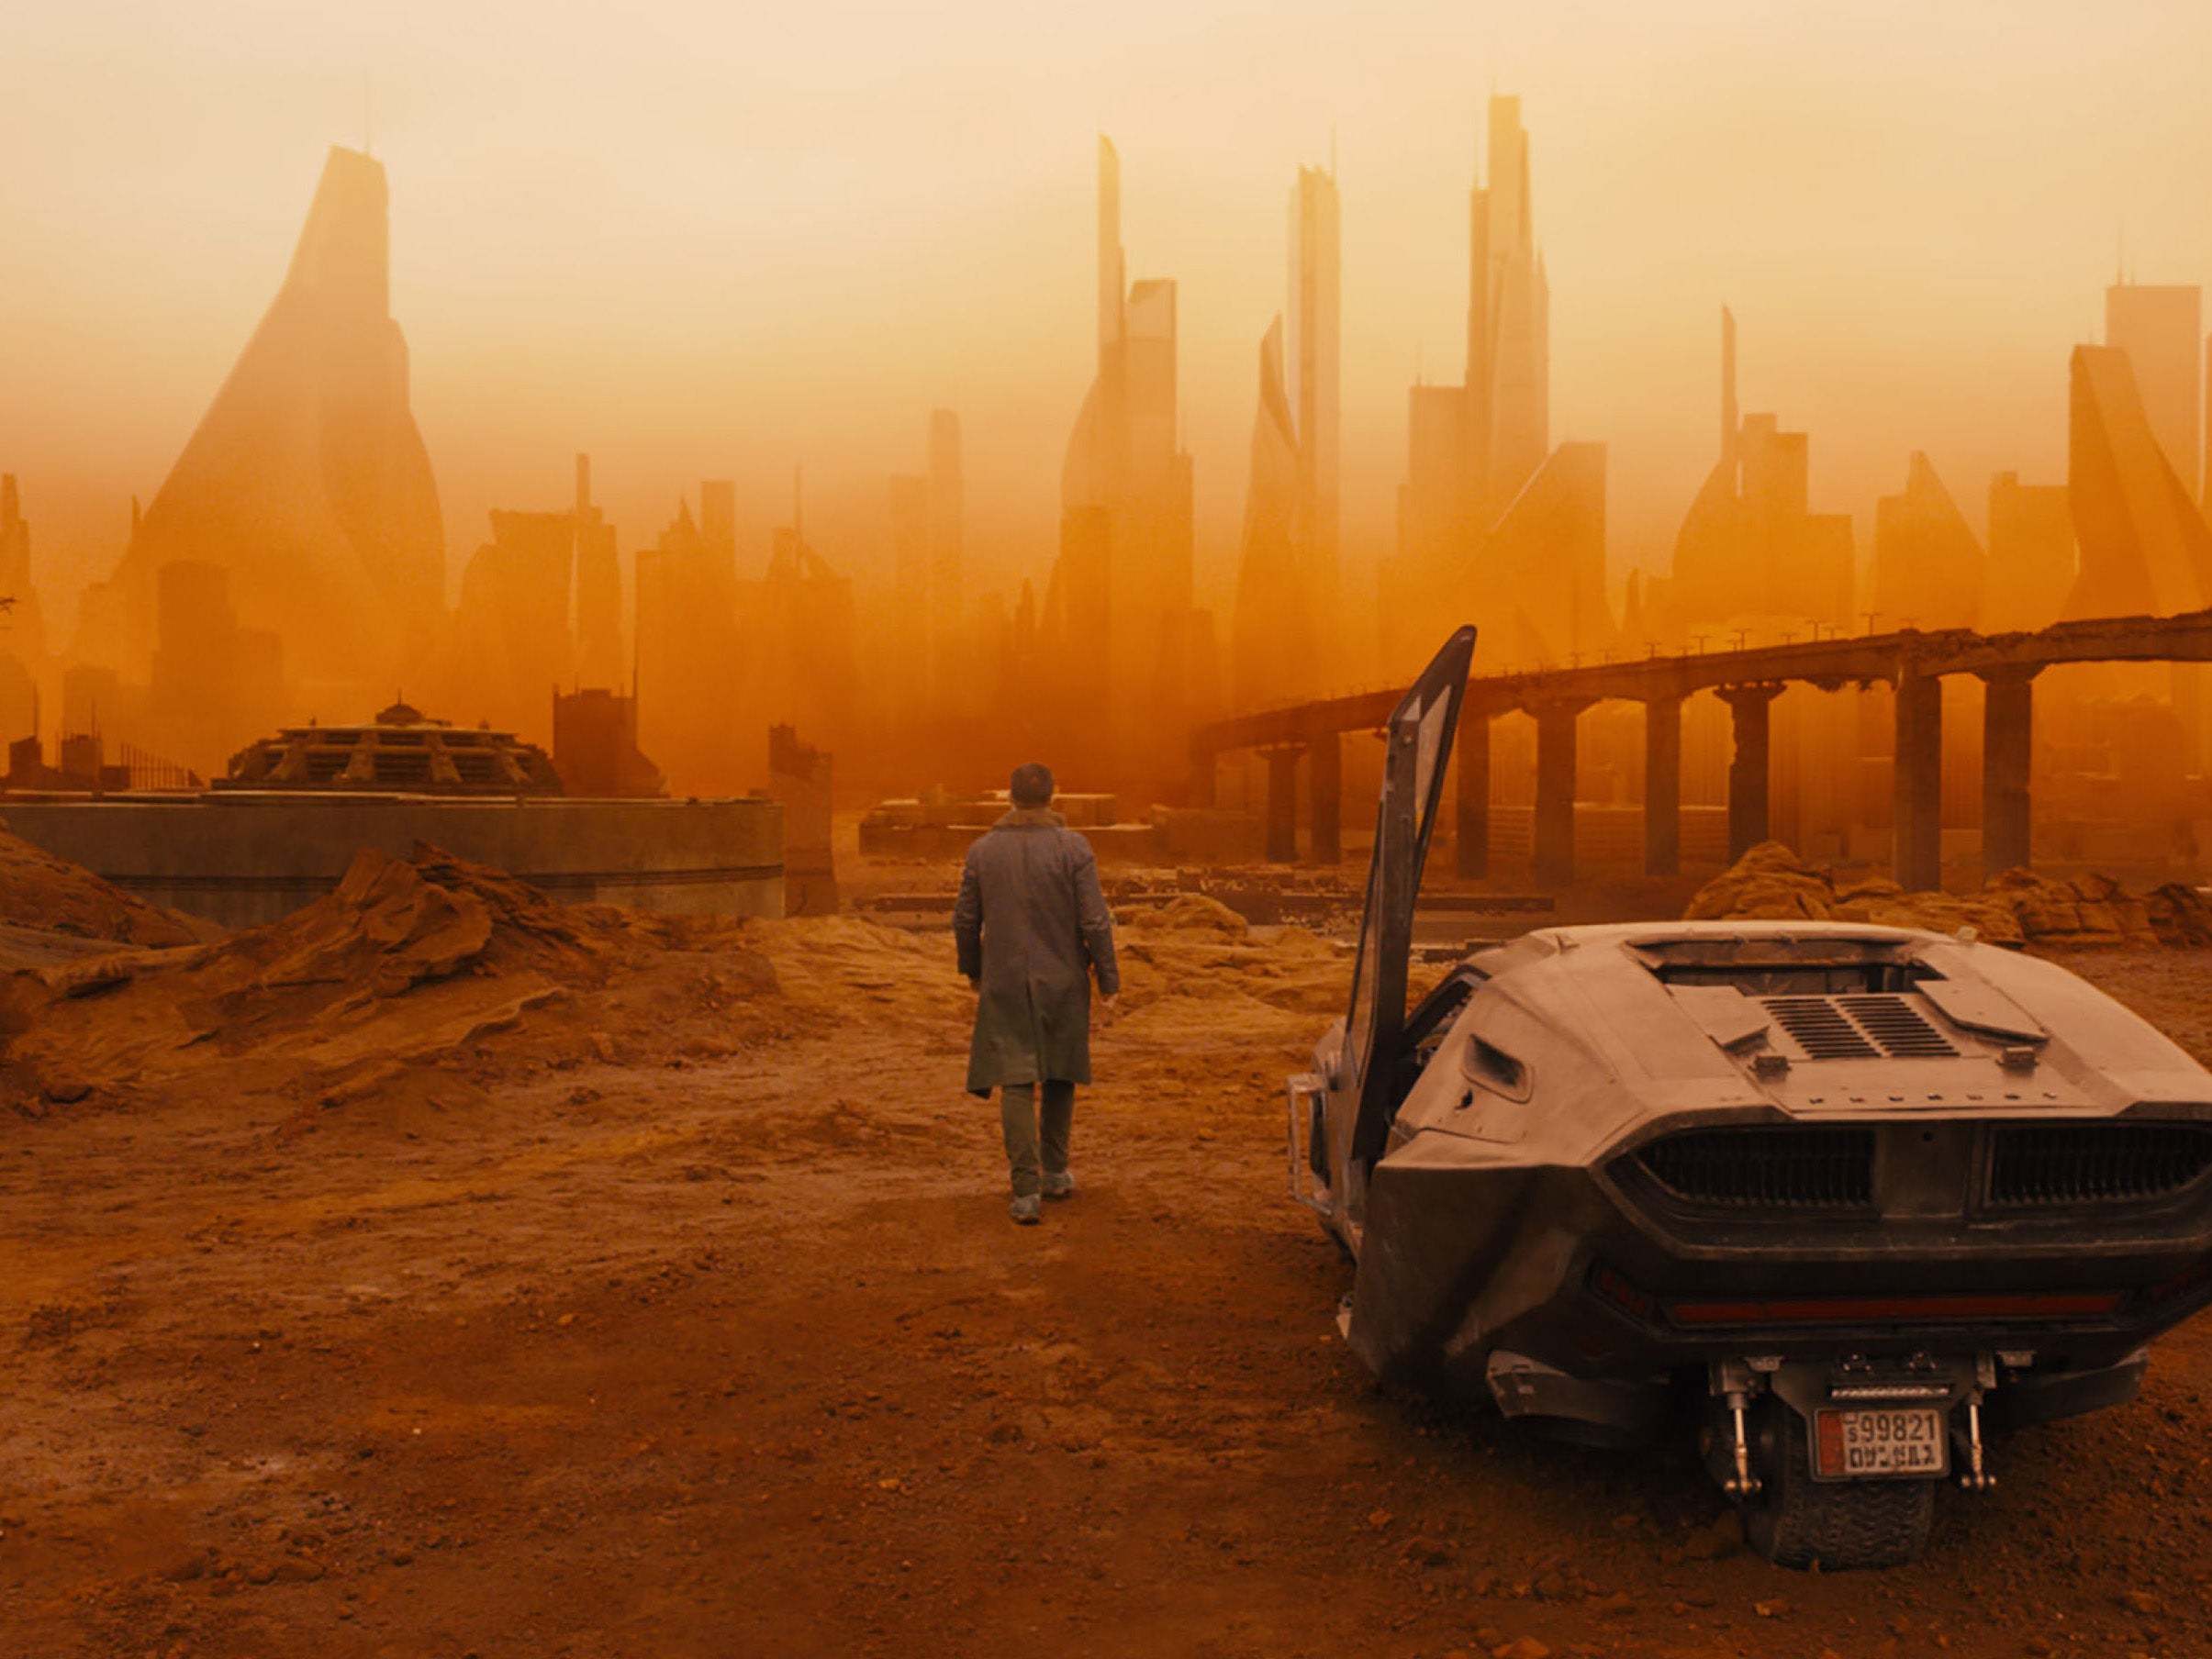 In space no one will hear you scream, in Blade Runner 2049 the angst comes  over loud and clear, The Independent